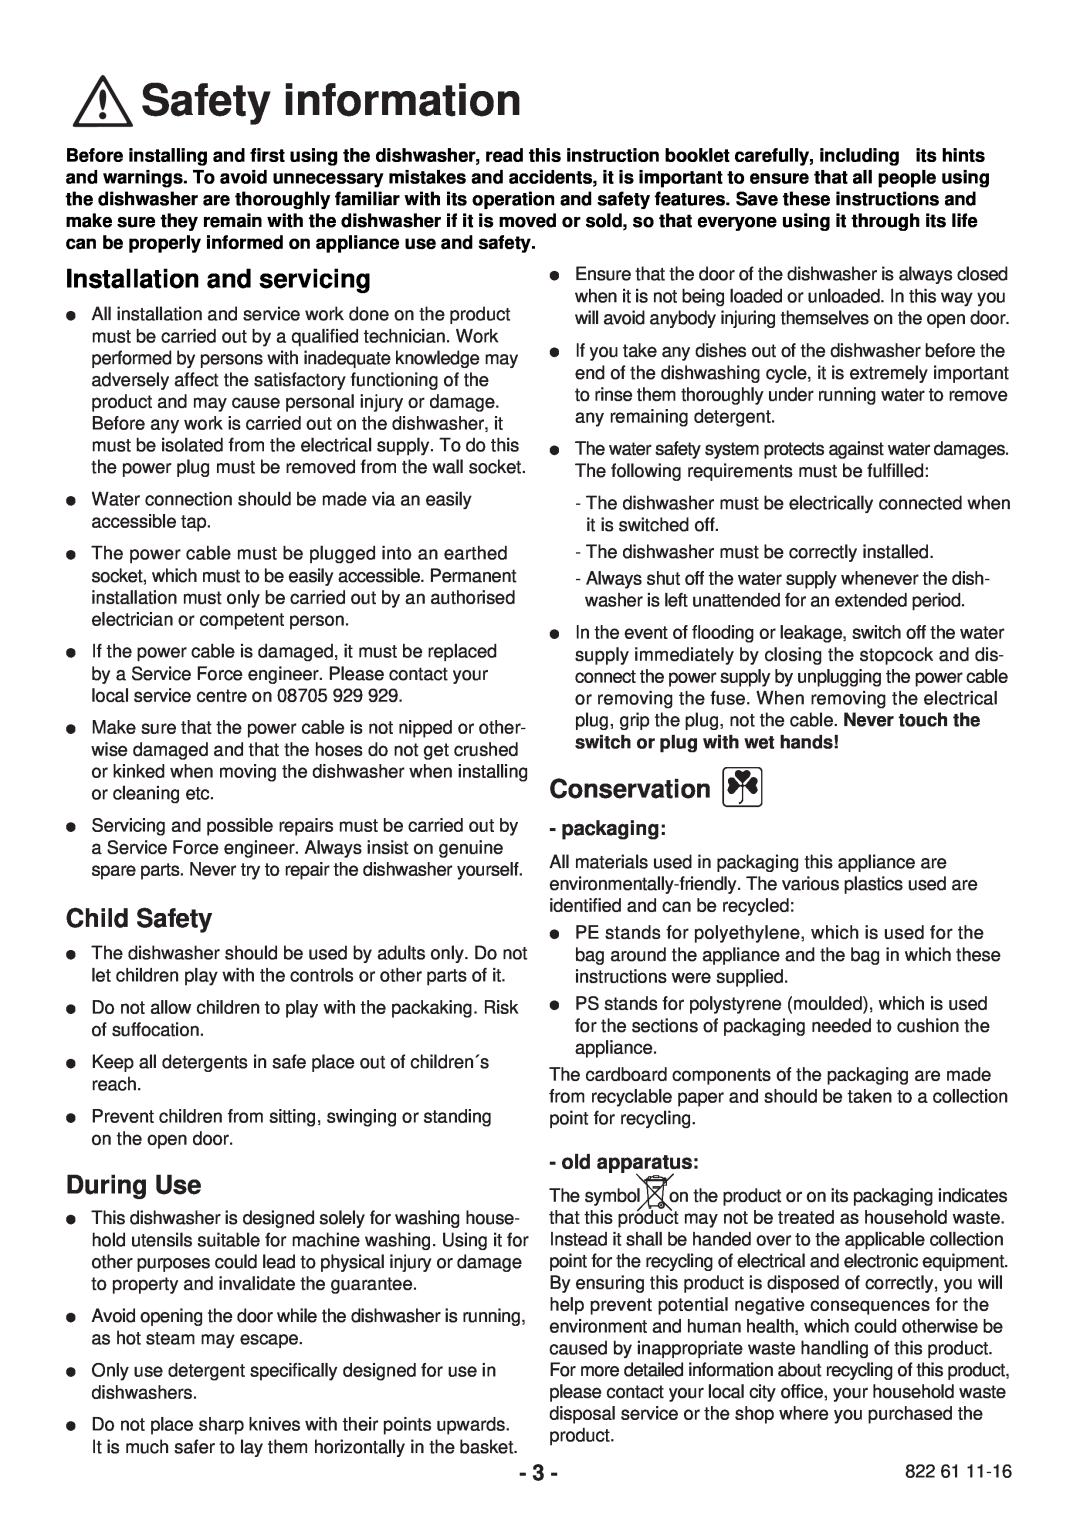 Zanussi ZSF 2420 manual Safety information, Installation and servicing, Child Safety, Conservation, During Use 